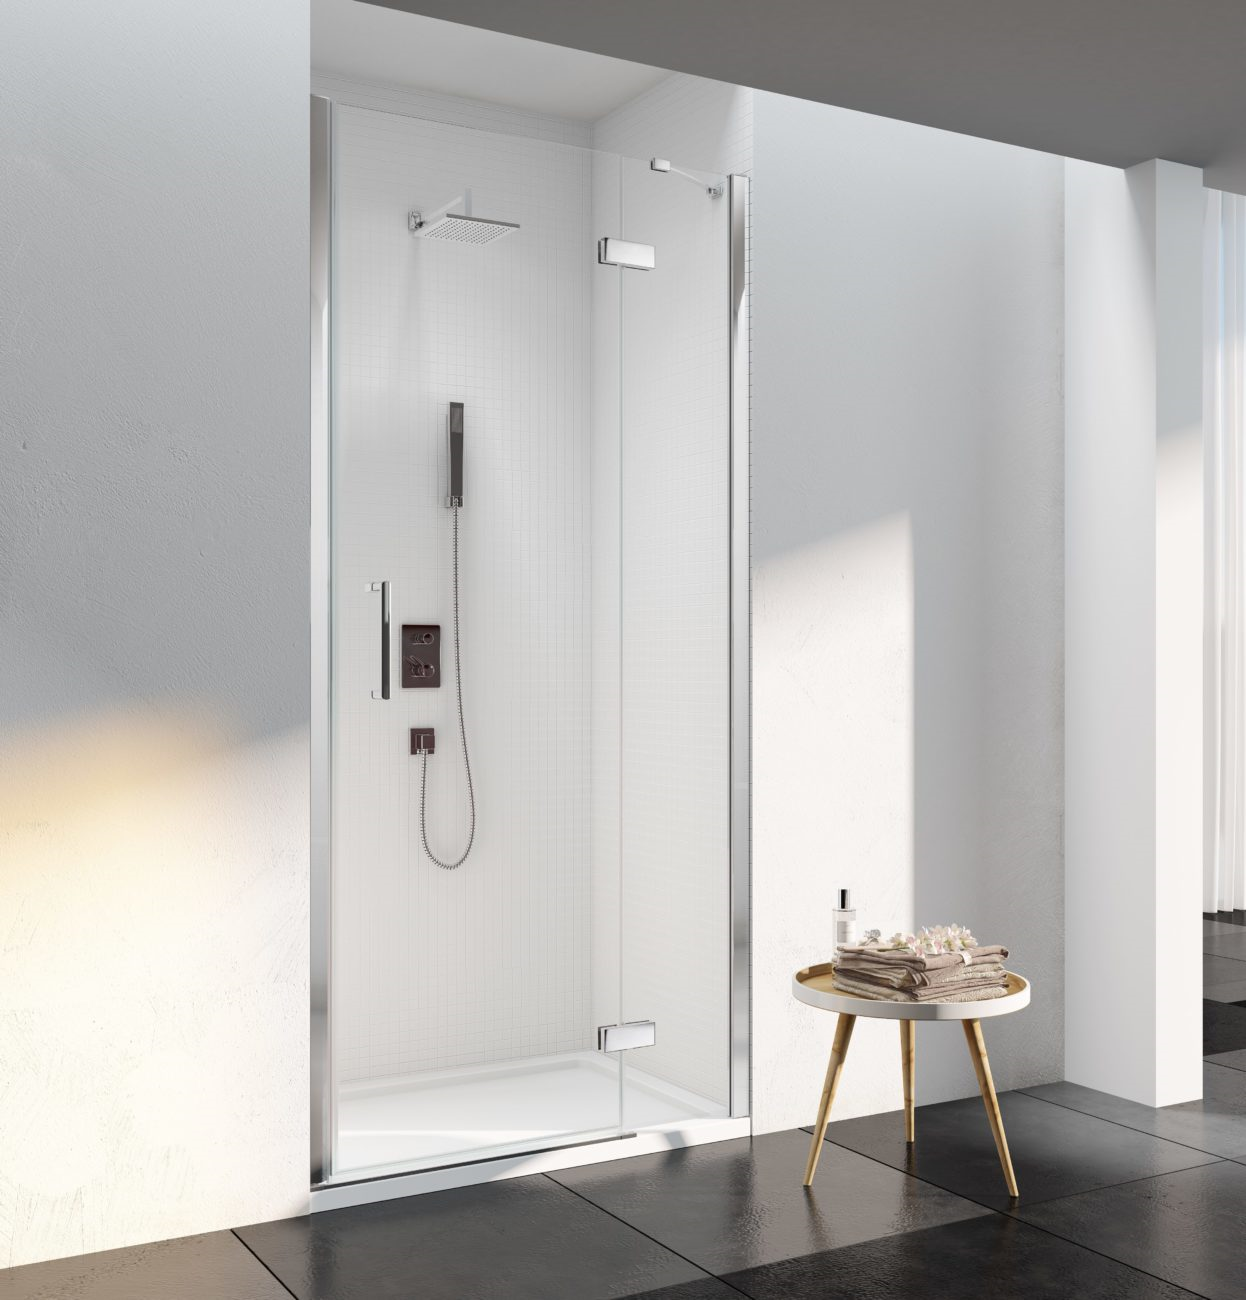 MERLYN S6F1400RECH Series 6 Framless Hinged Shower Door 1400mm with In-Line Panel for Recess Fitting